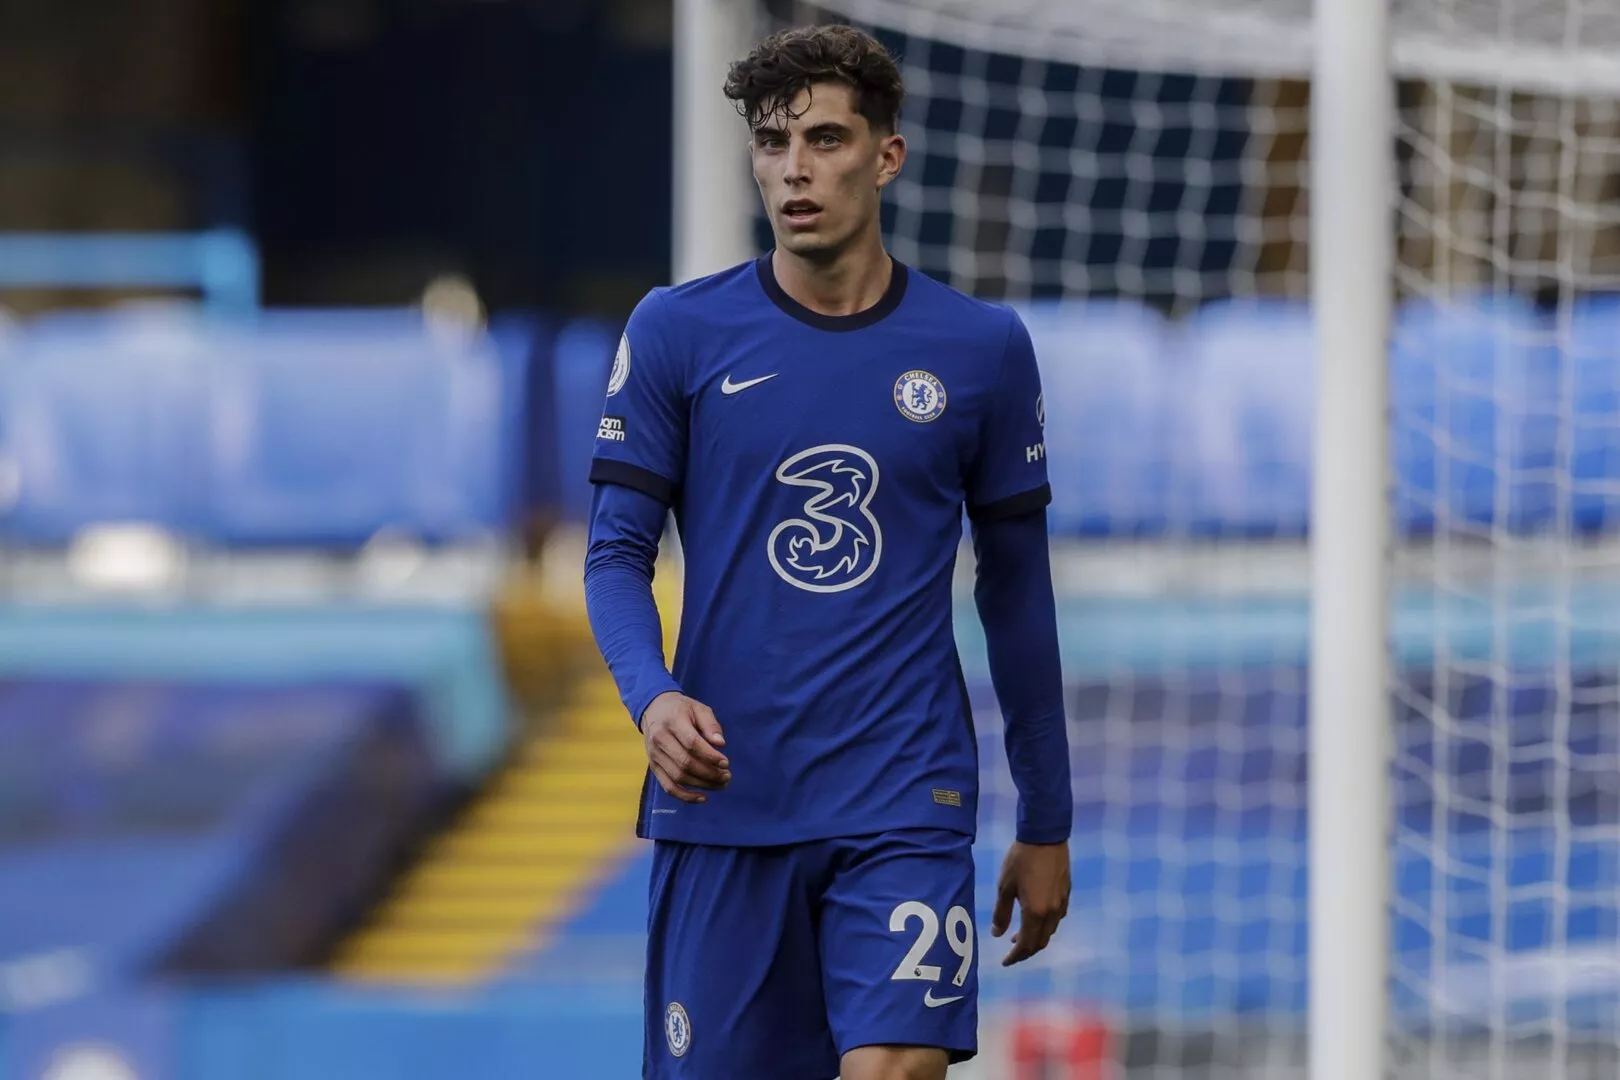 Real Madrid lining up a big move for Chelsea's Kai Havertz